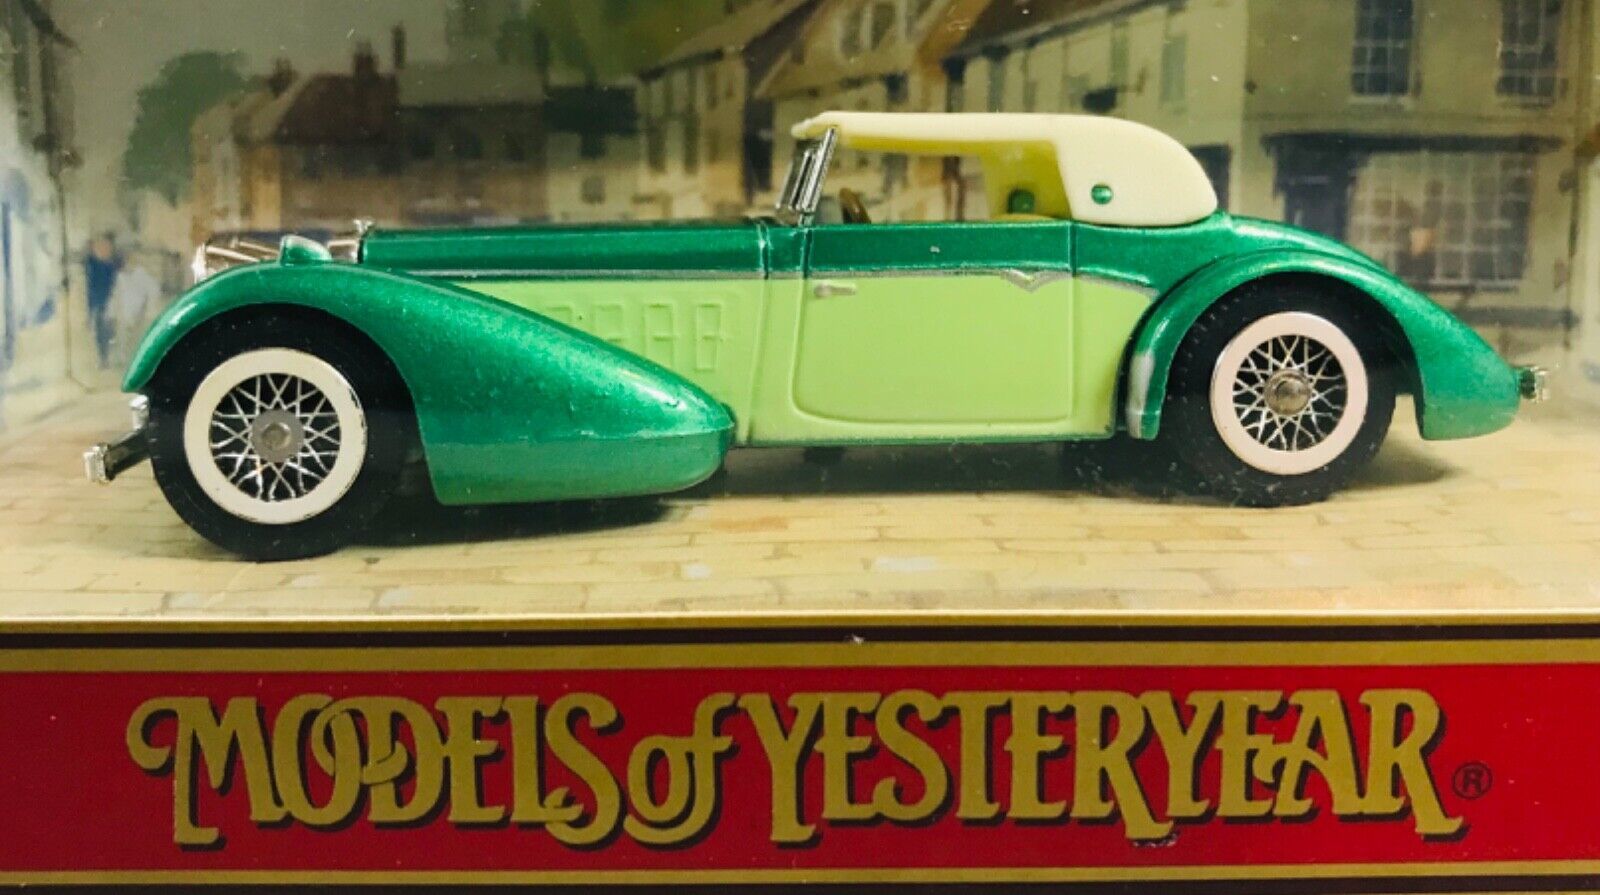 Primary image for MATCHBOX Models of Yesteryear - Y17 - 1938 Hispano Suiza Convertible - 1:48